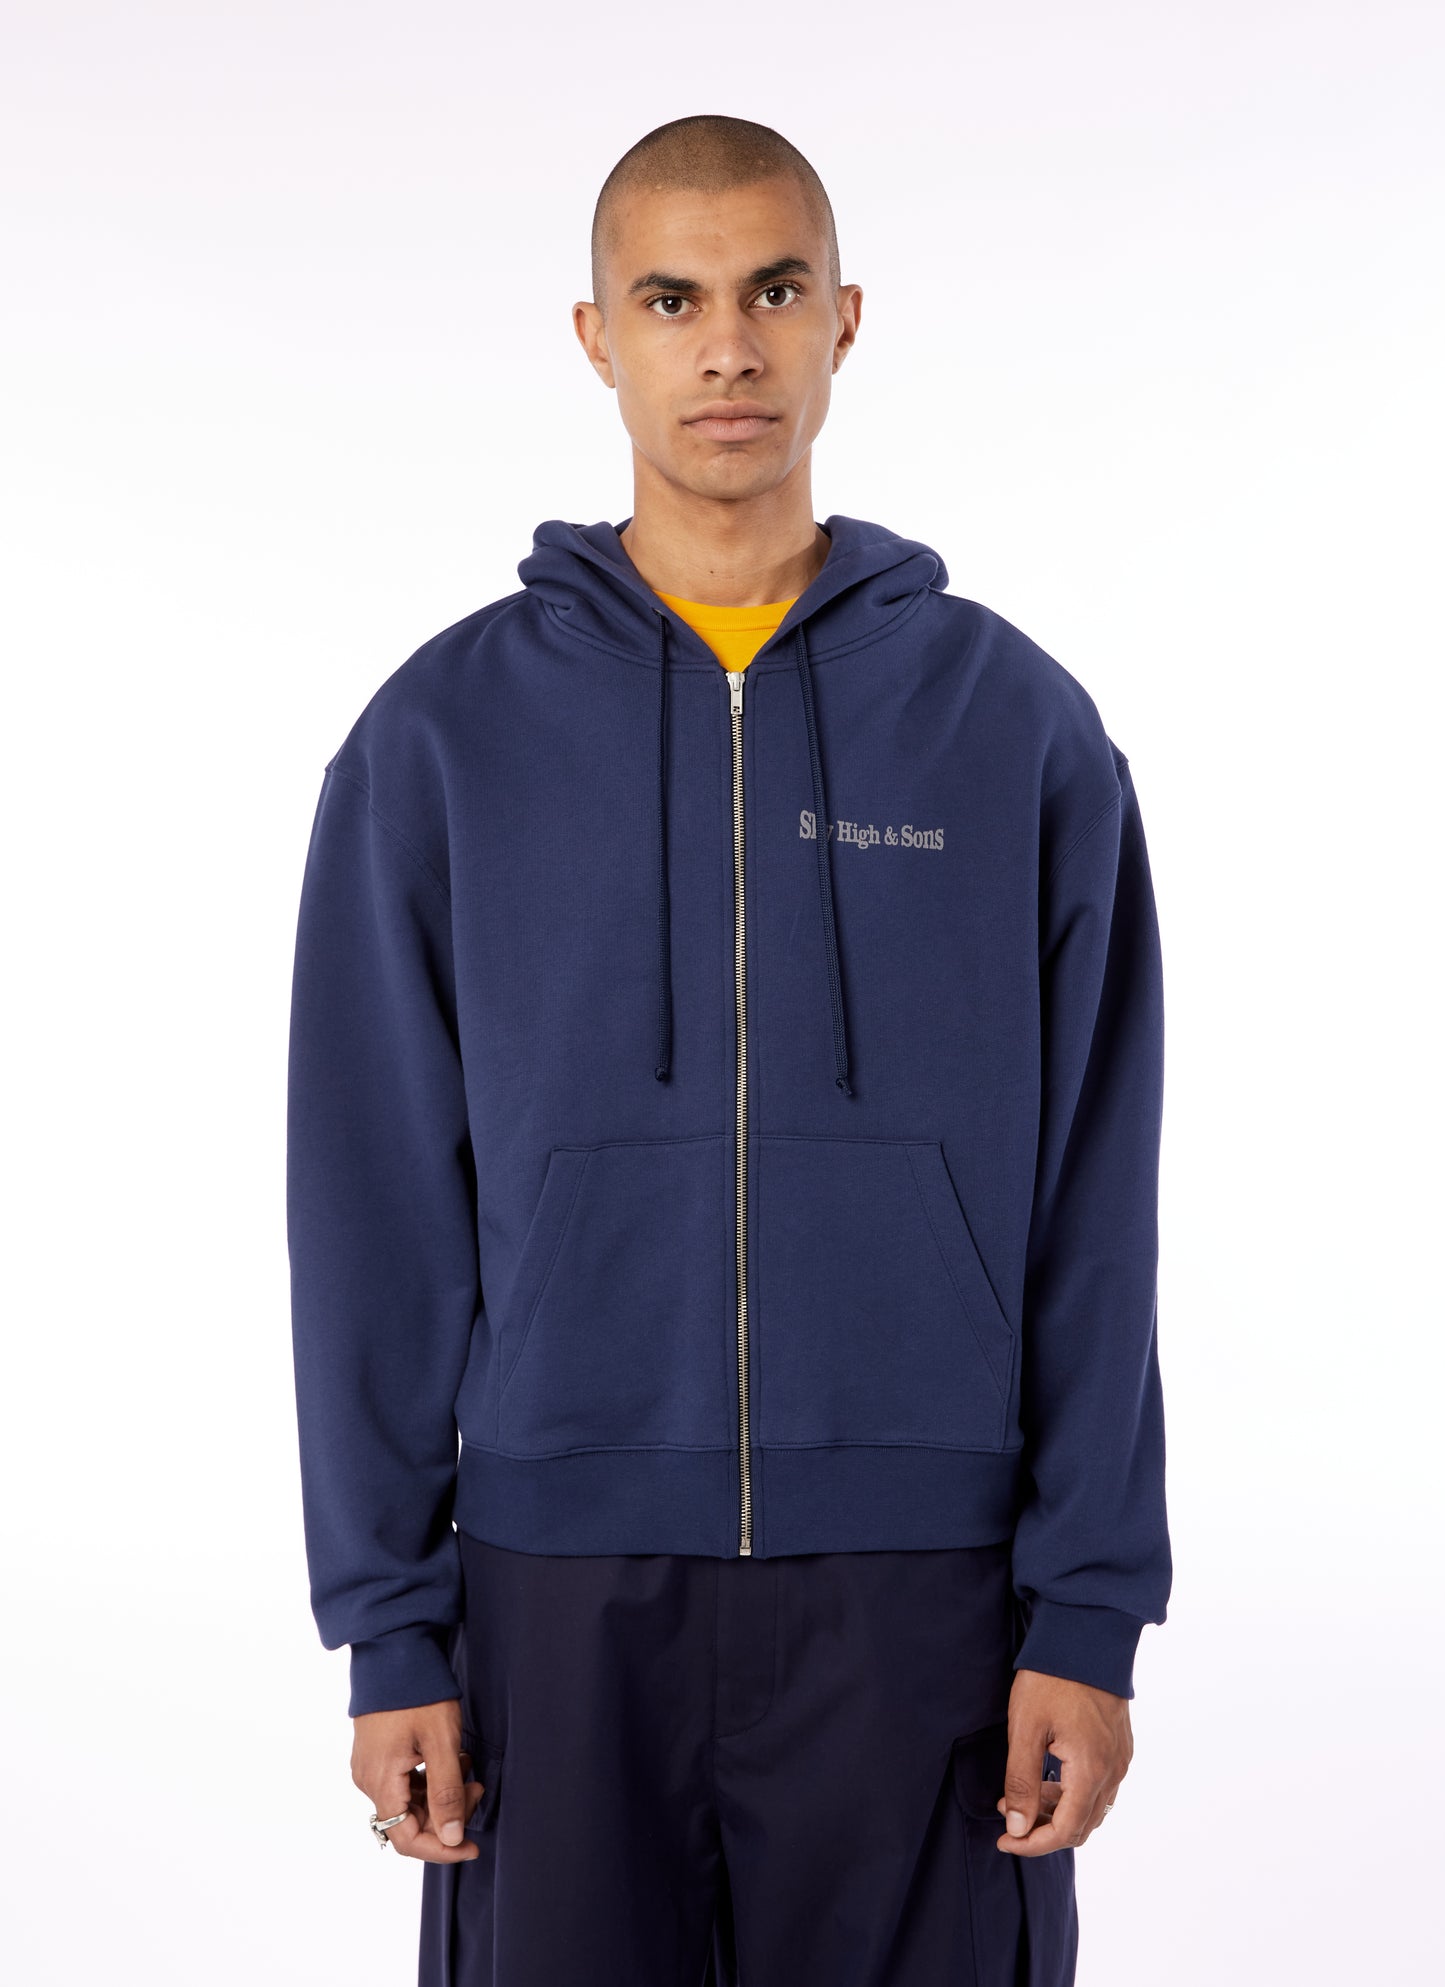 SKY HIGH AND SONS ZIP-UP HOODIE